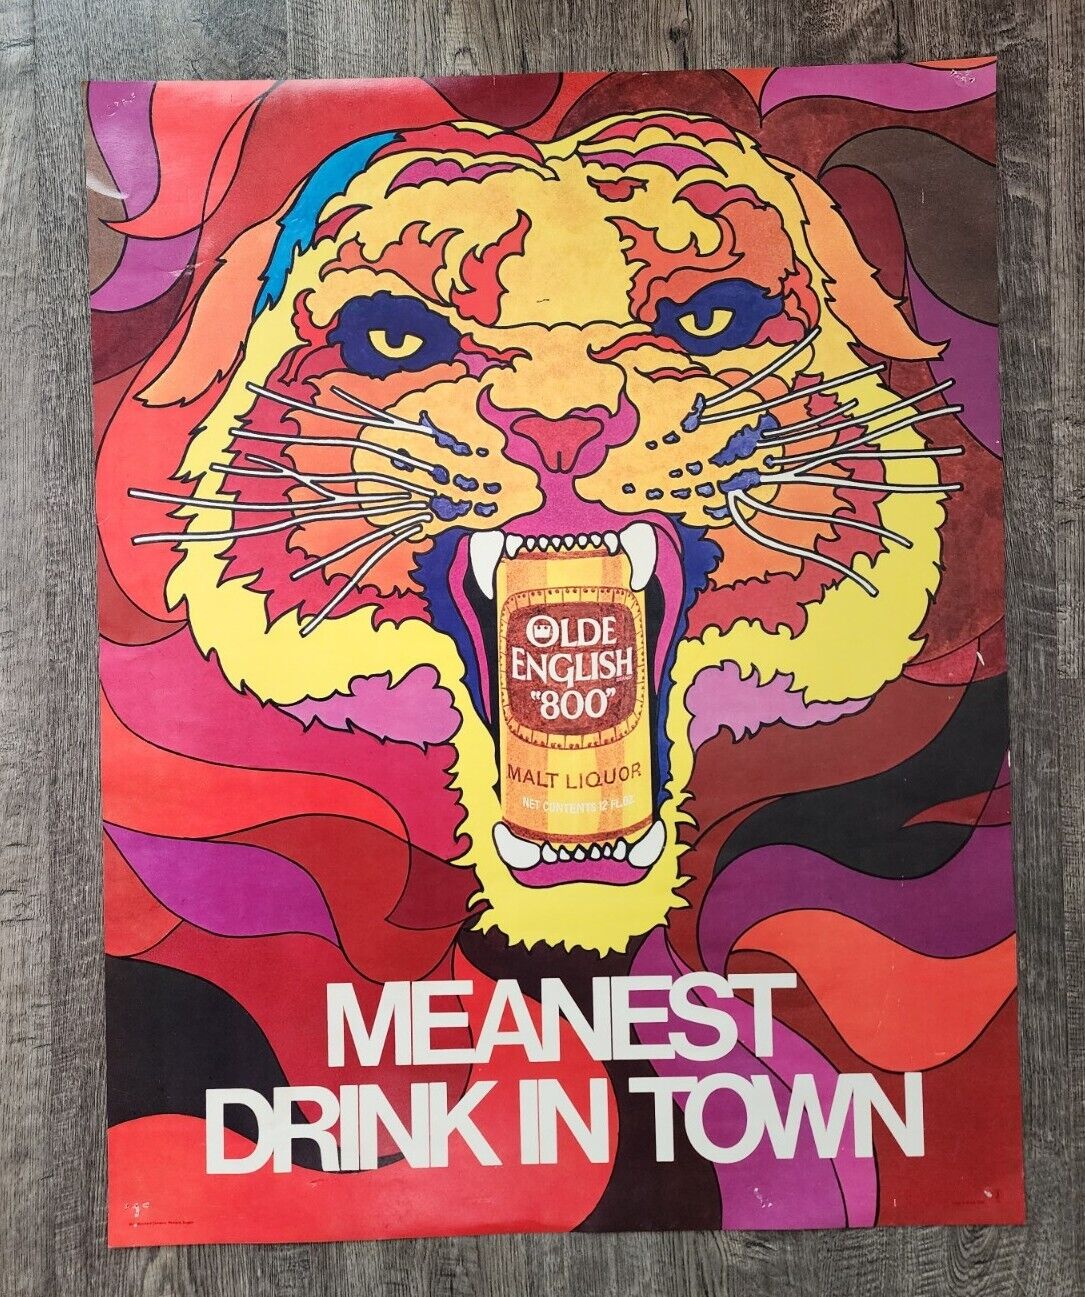 Olde English 800 Malt Liquor Beer Poster Meanest Drink In Town Psychadelic Tiger